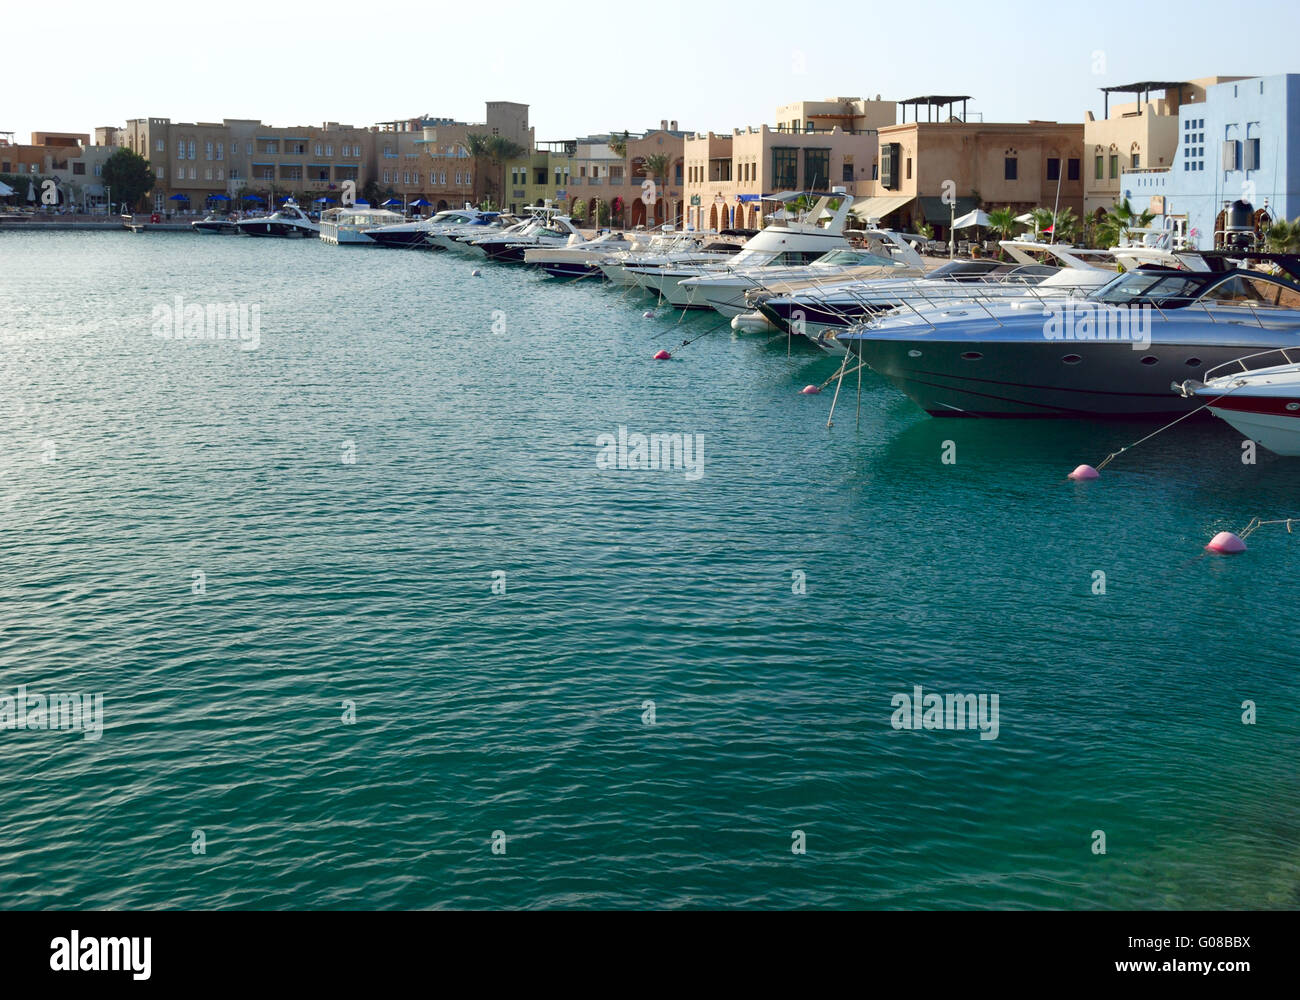 africa, apartment, architecture, bay, blue, boat, city, climate, Stock Photo